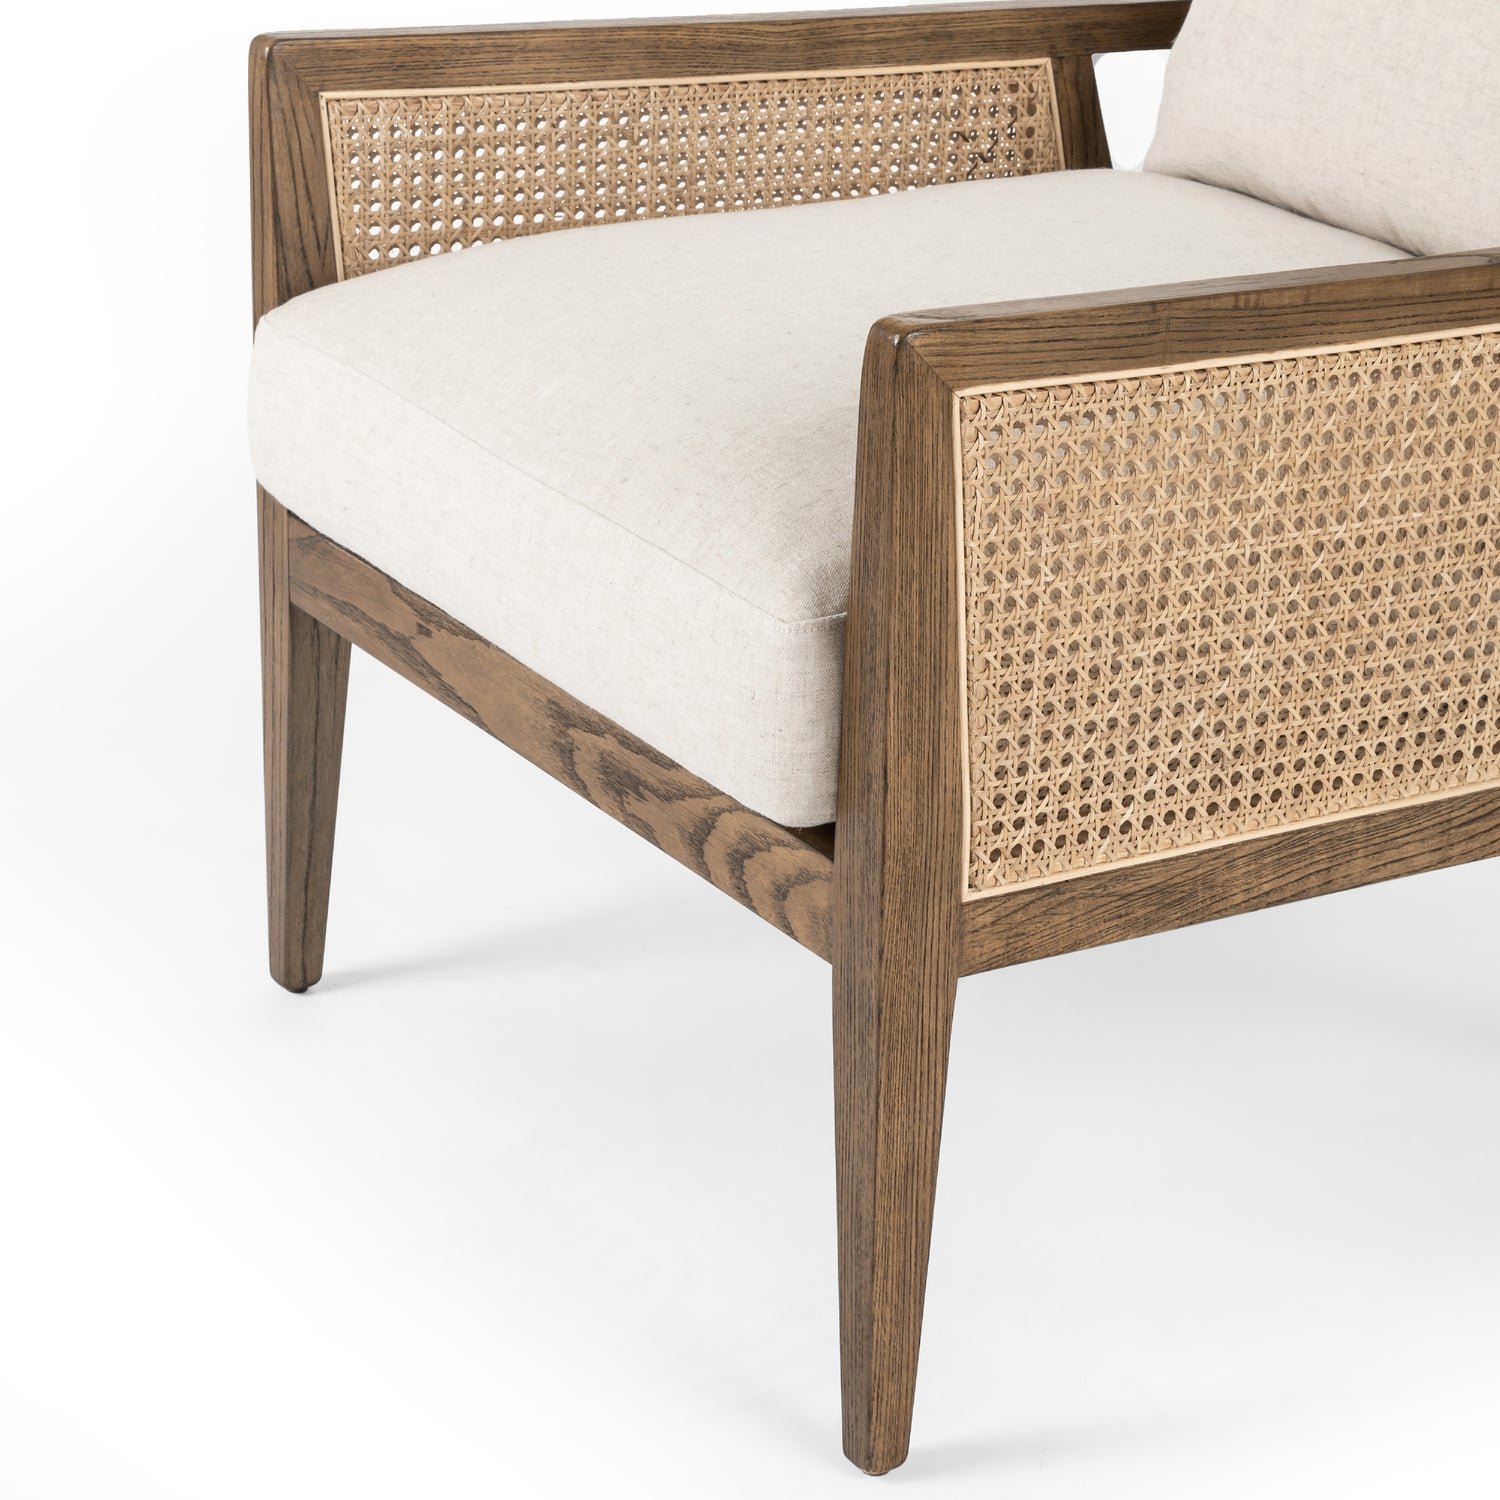 Savile Flax Fabric & Light Natural Cane with Toasted Parawood | Antonia Cane Chair | Valley Ridge Furniture